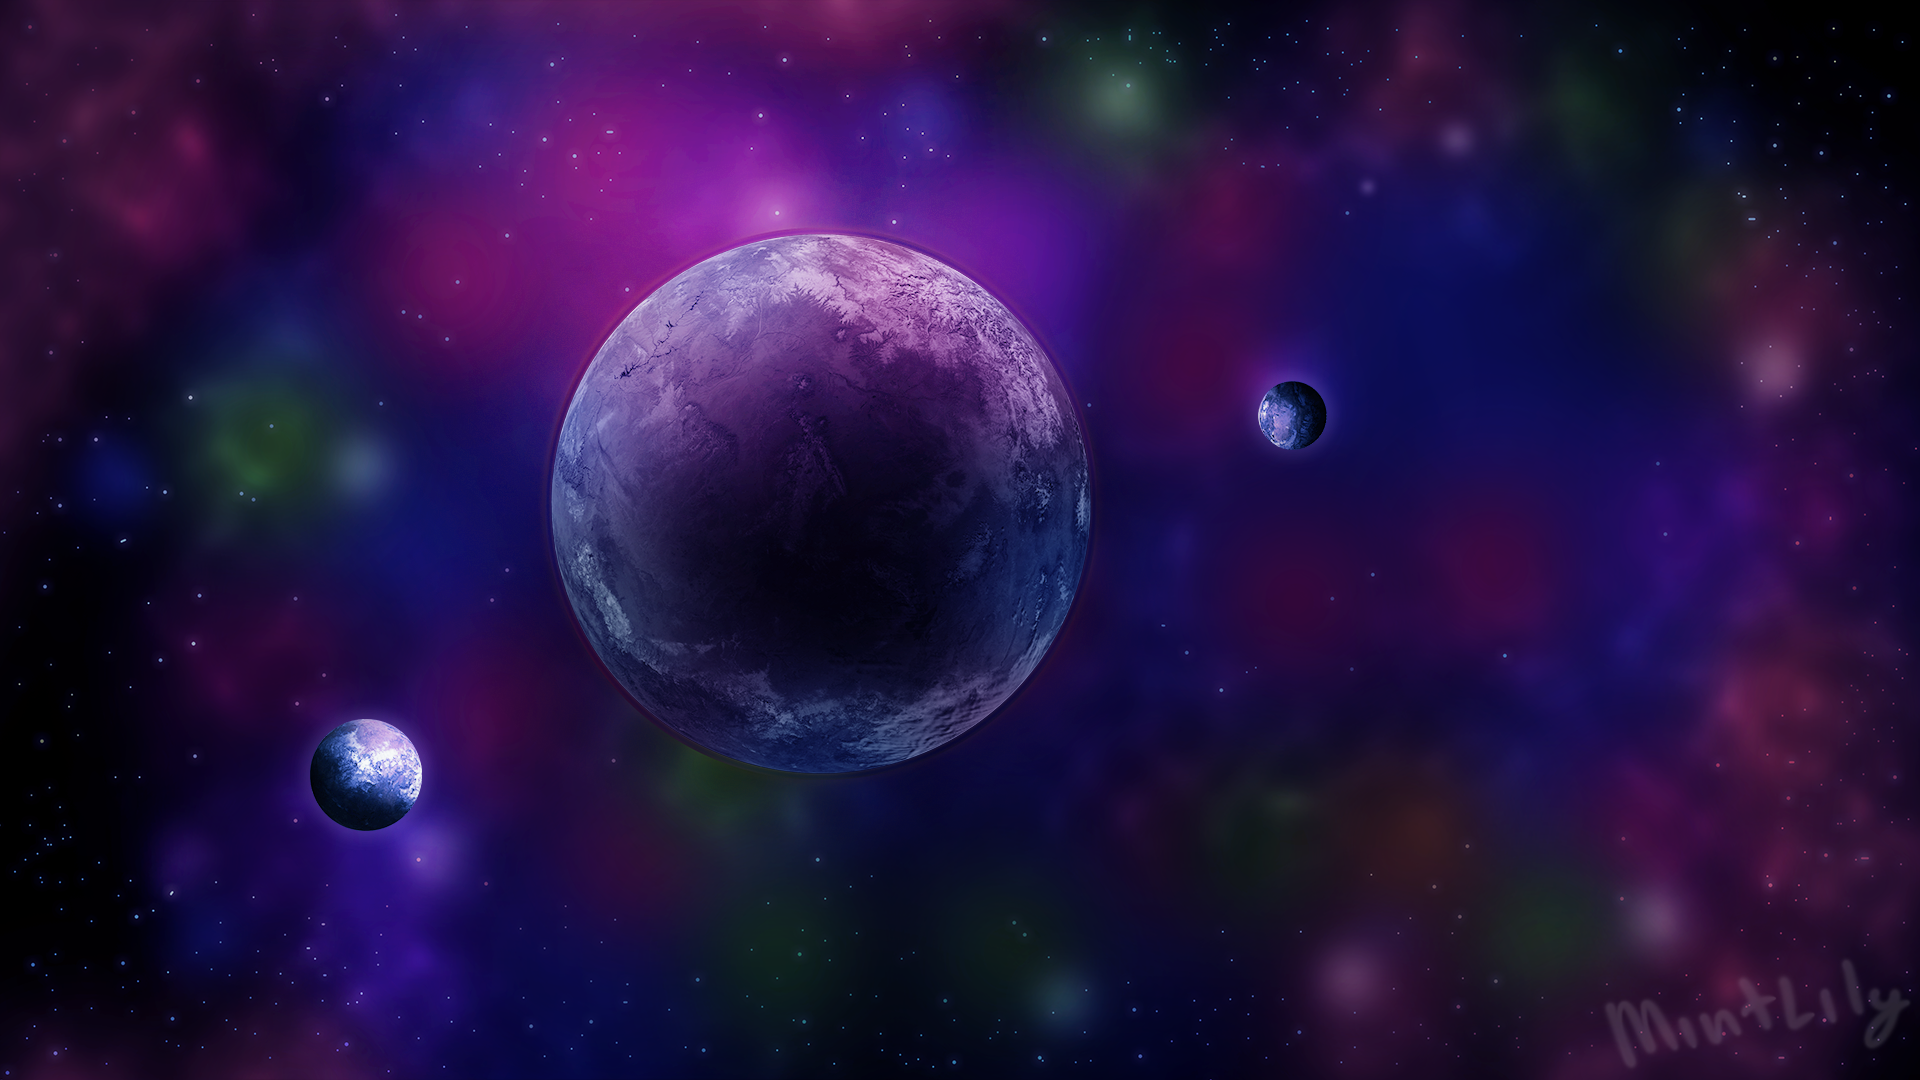 Recreated space scene originally created back in 2018. New and improved with my current skillset.